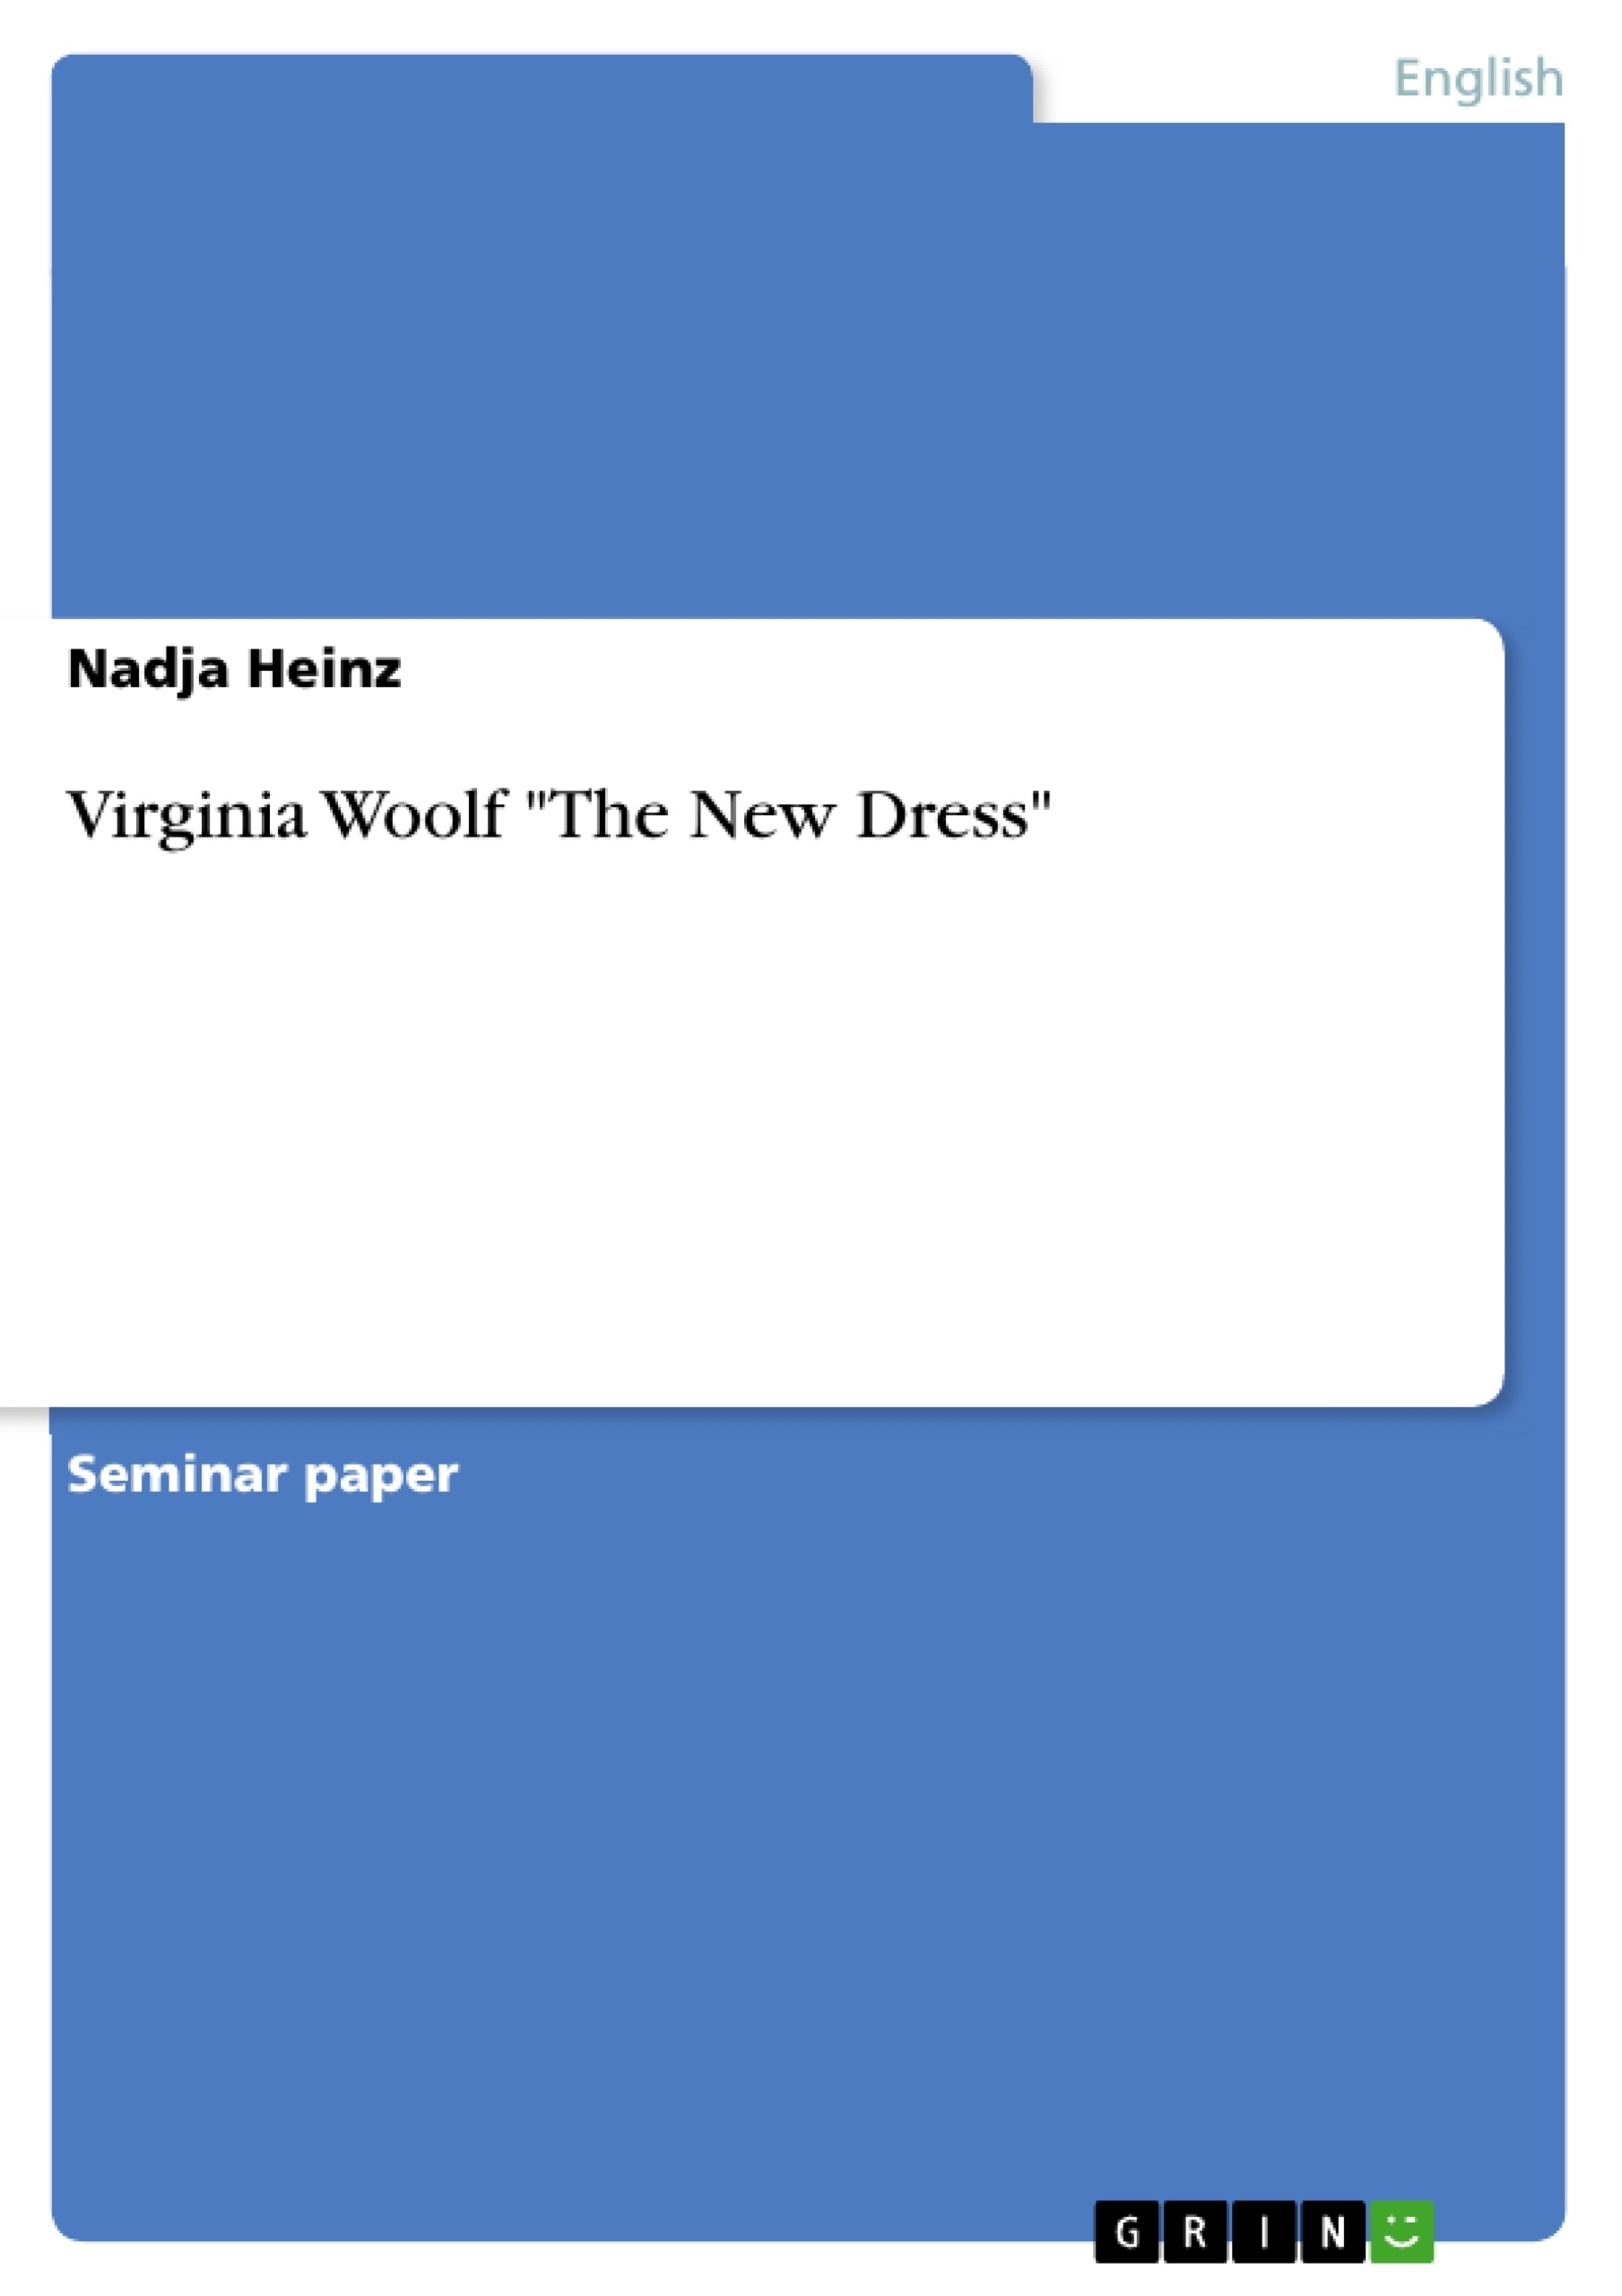 Title: Virginia Woolf "The New Dress"